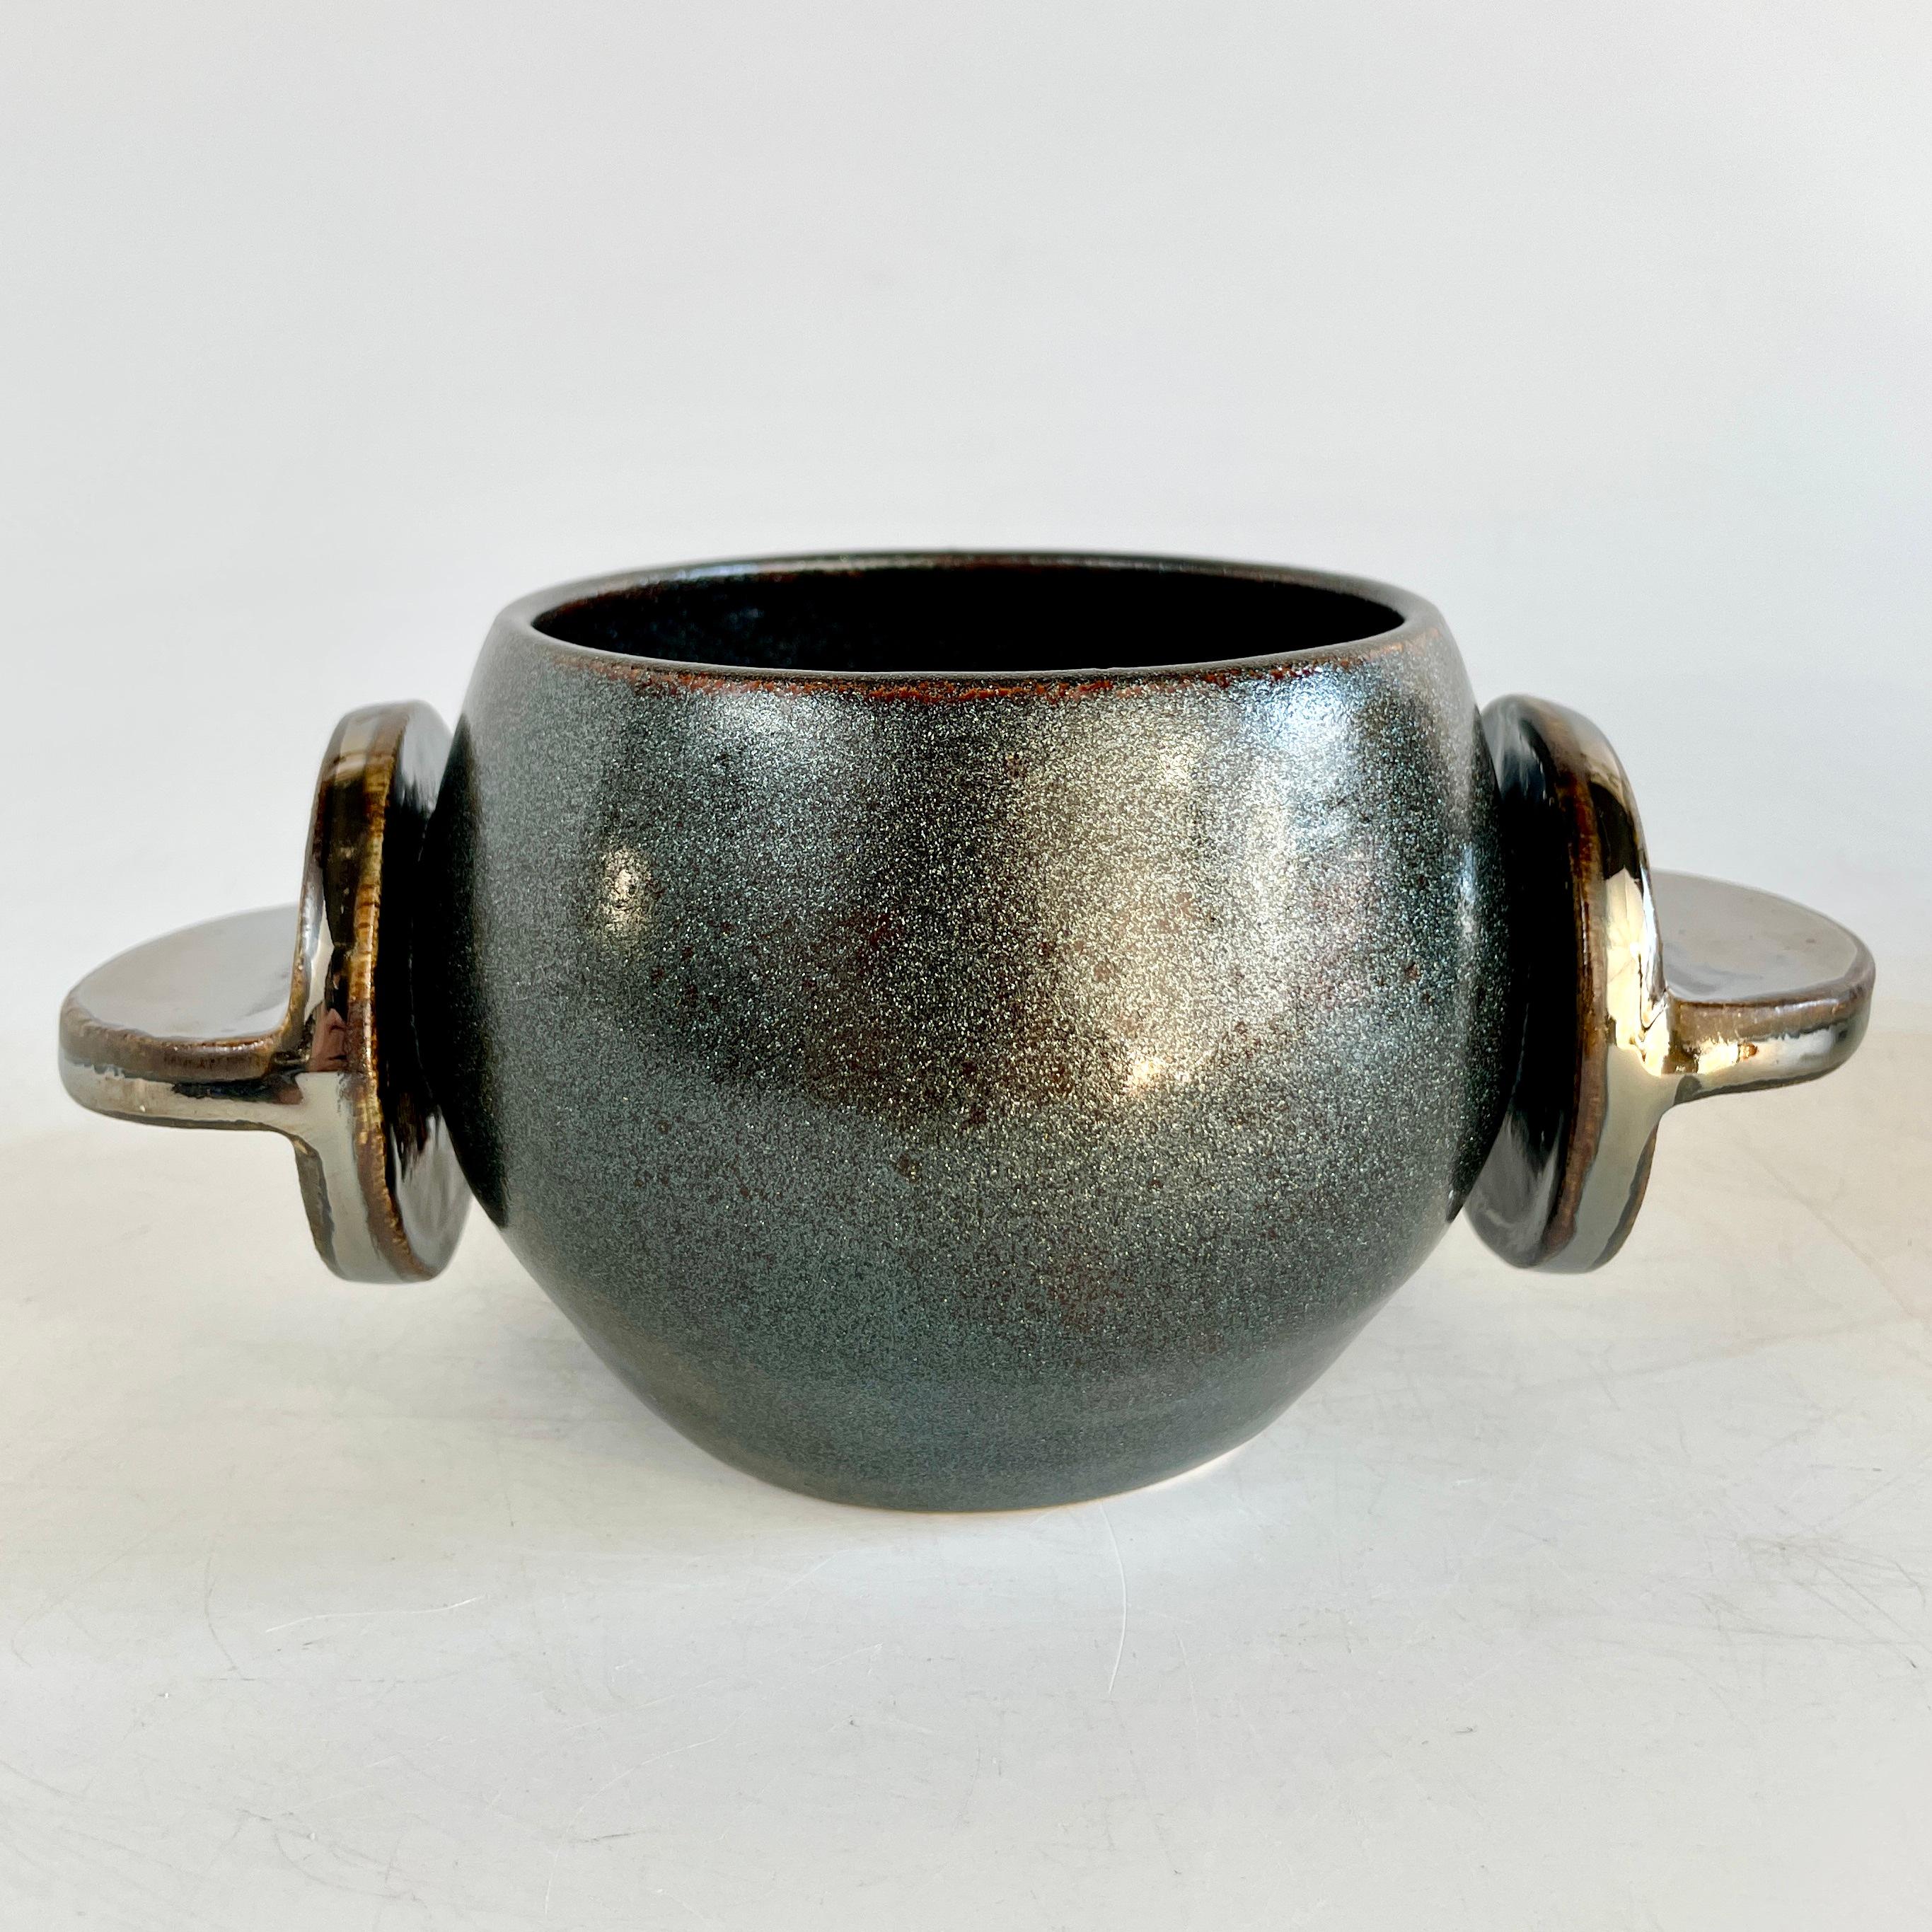 The Tab Orbital, shown here in Diffused China Red/Raven and Broken Silver, the food safe vessel for your favorite beverage of choice, entertaining, or as a decorative object or objet d'art. Versatile, sustainable and one of kind, made of recycled